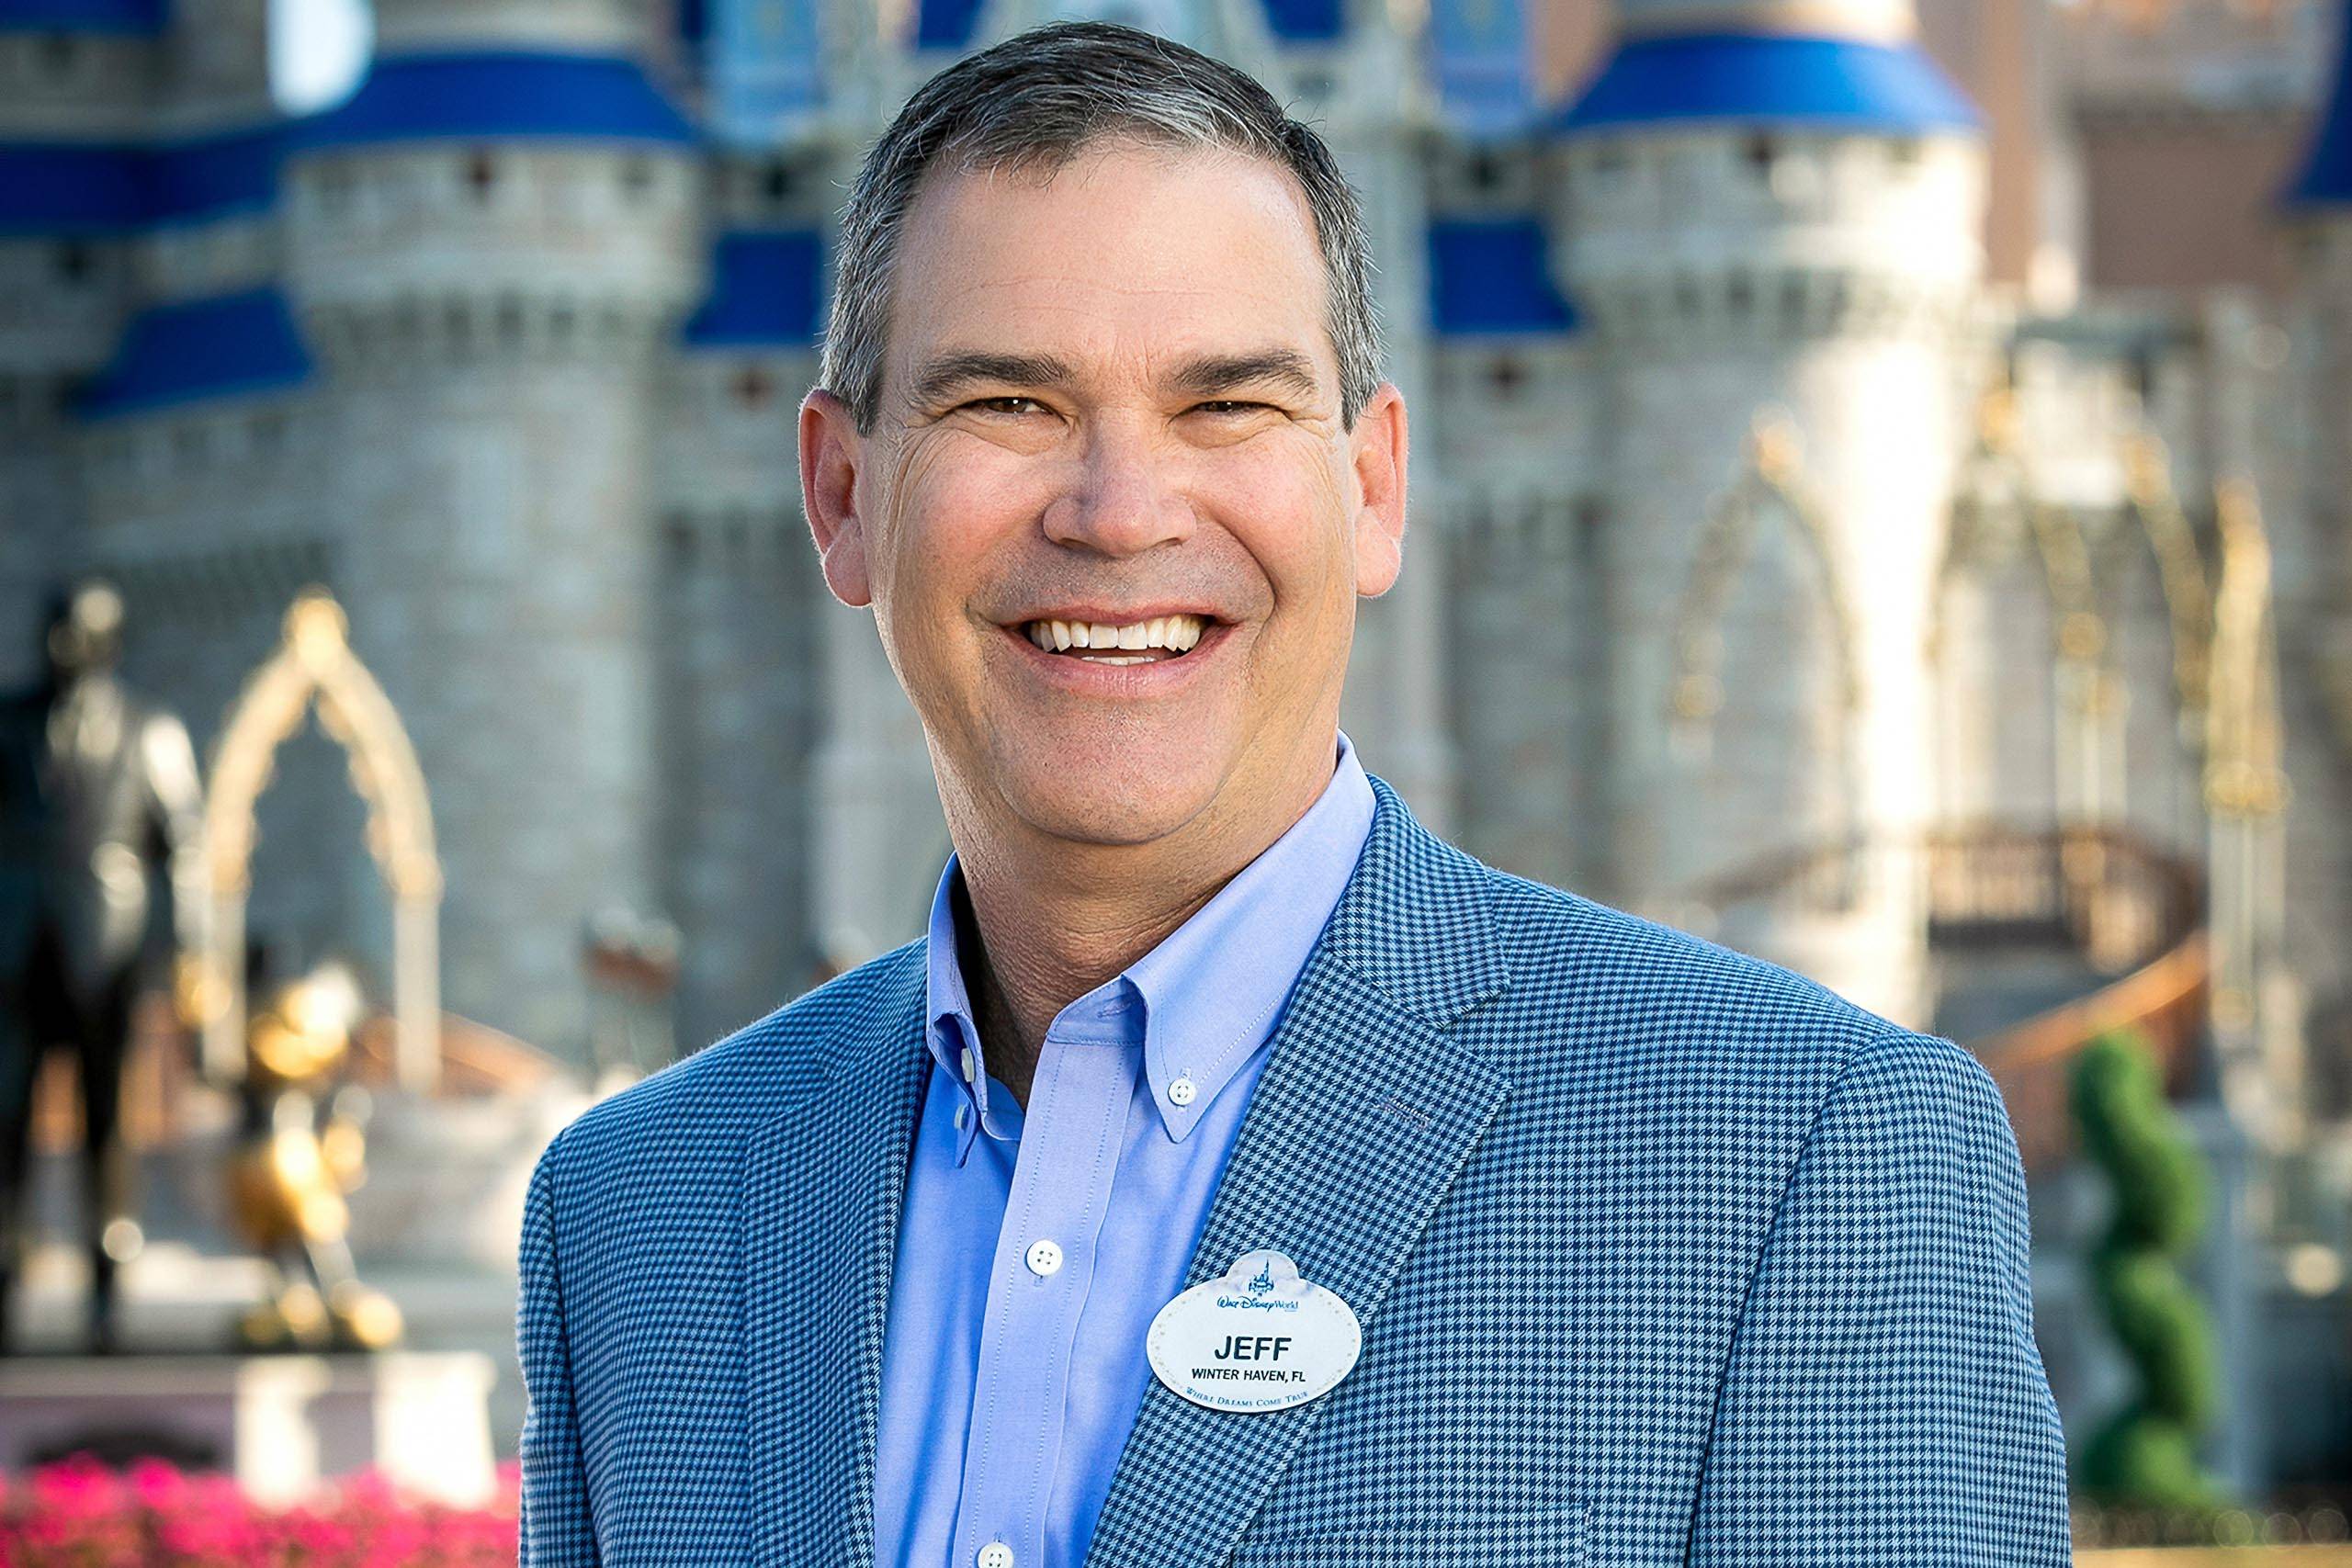 Walt Disney World President comments on the latest union negotiations and pay increases for cast members